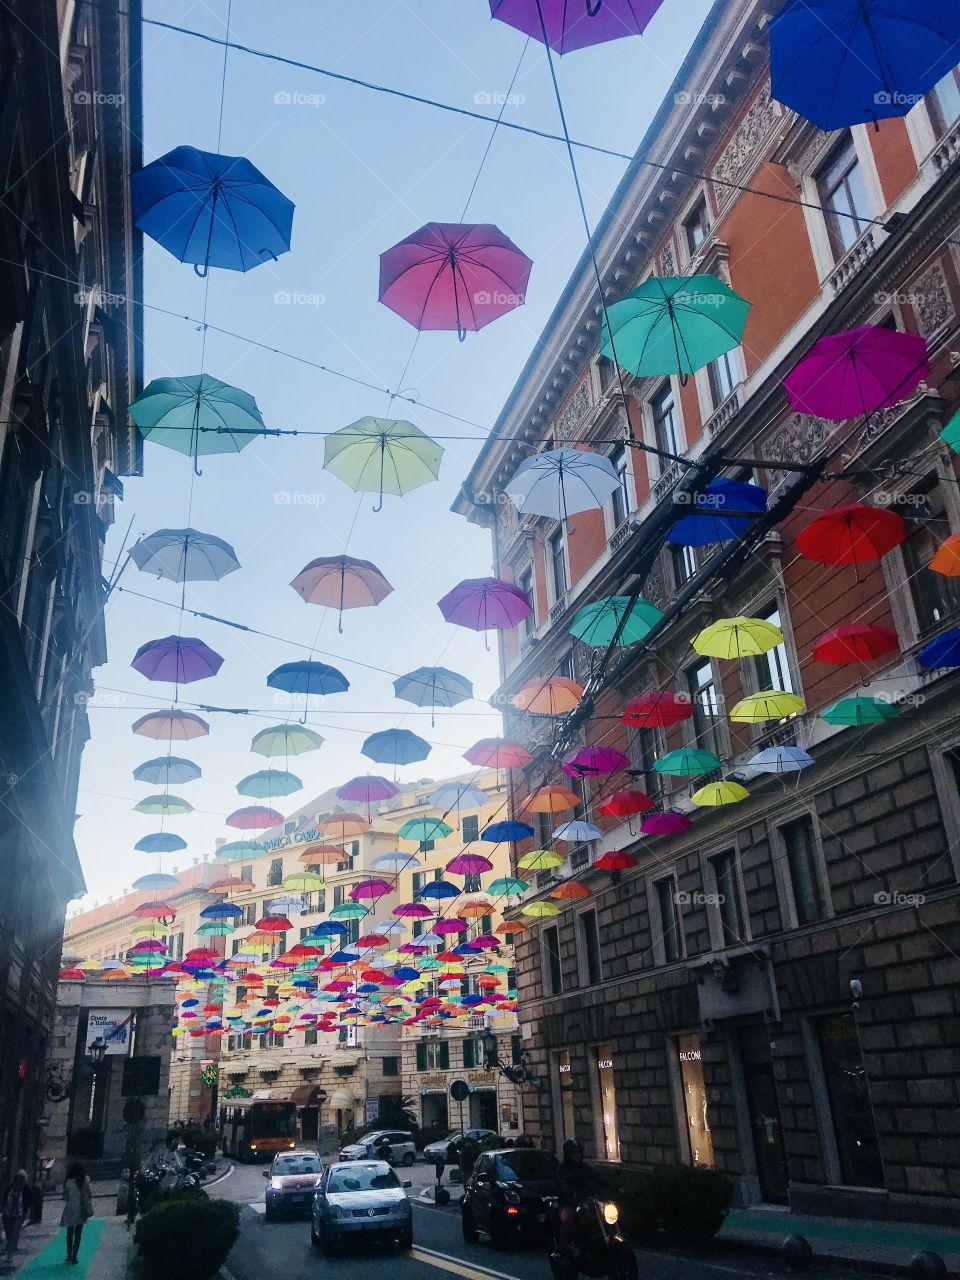 Charity event in Genoa: the umbrellas will be sold to raise funds for the pediatric hospital 